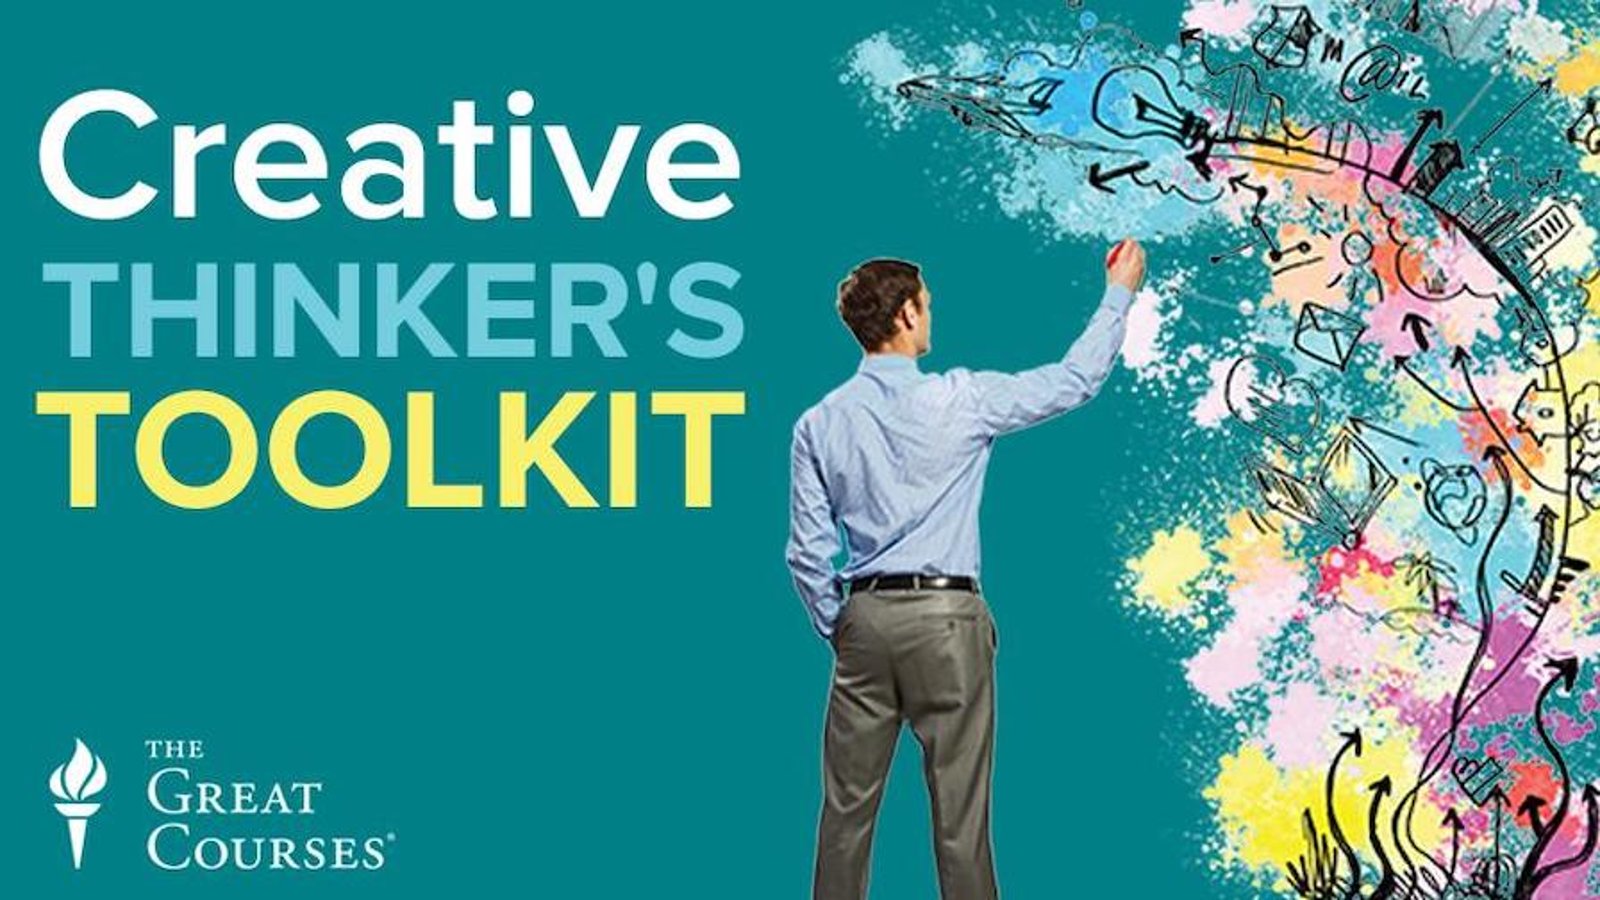 The Creative Thinker's Toolkit - How to Think Creatively